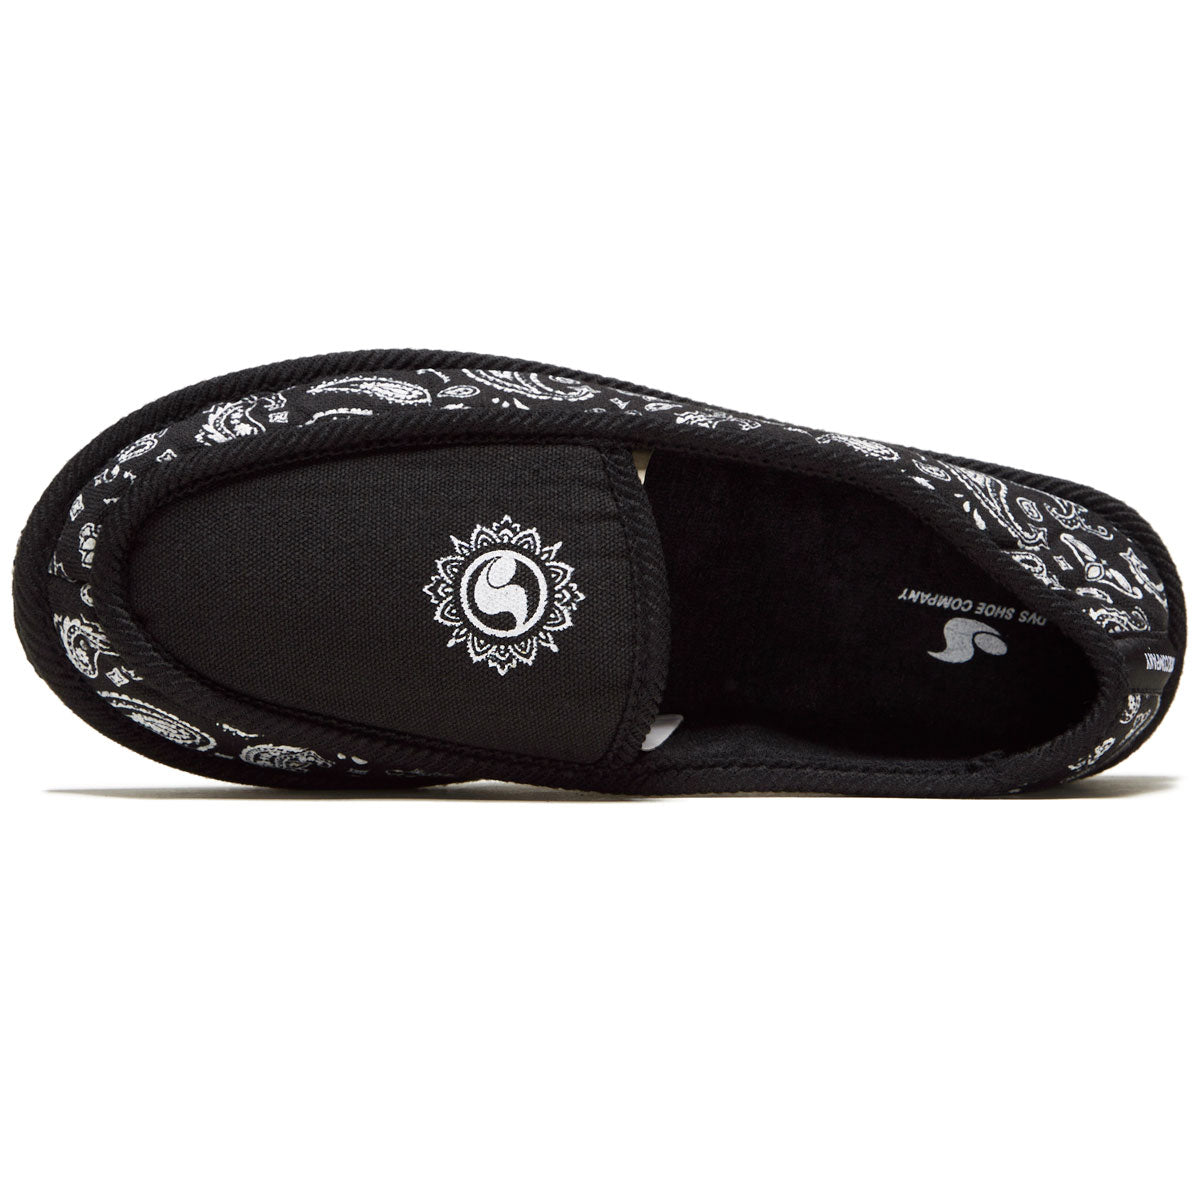 DVS Francisco Slippers - Black/White Printed Canvas image 3